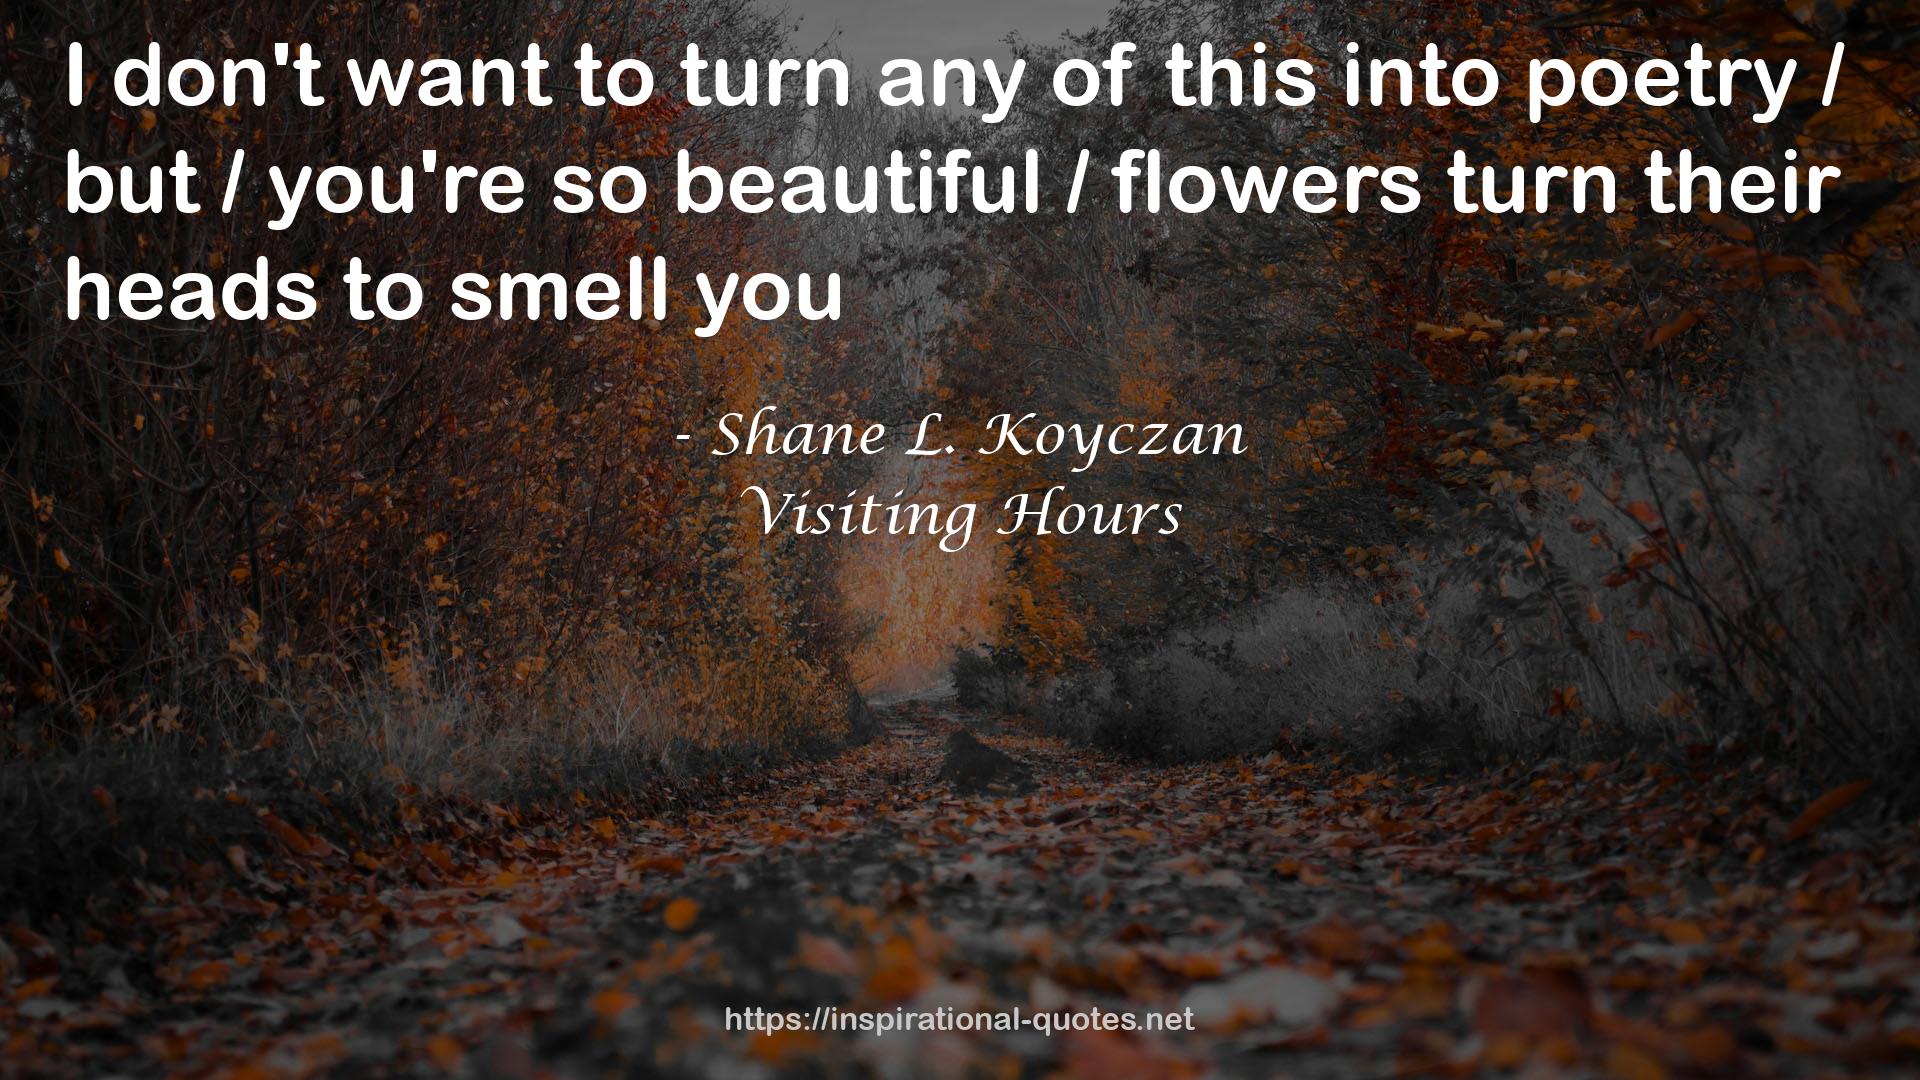 Visiting Hours QUOTES